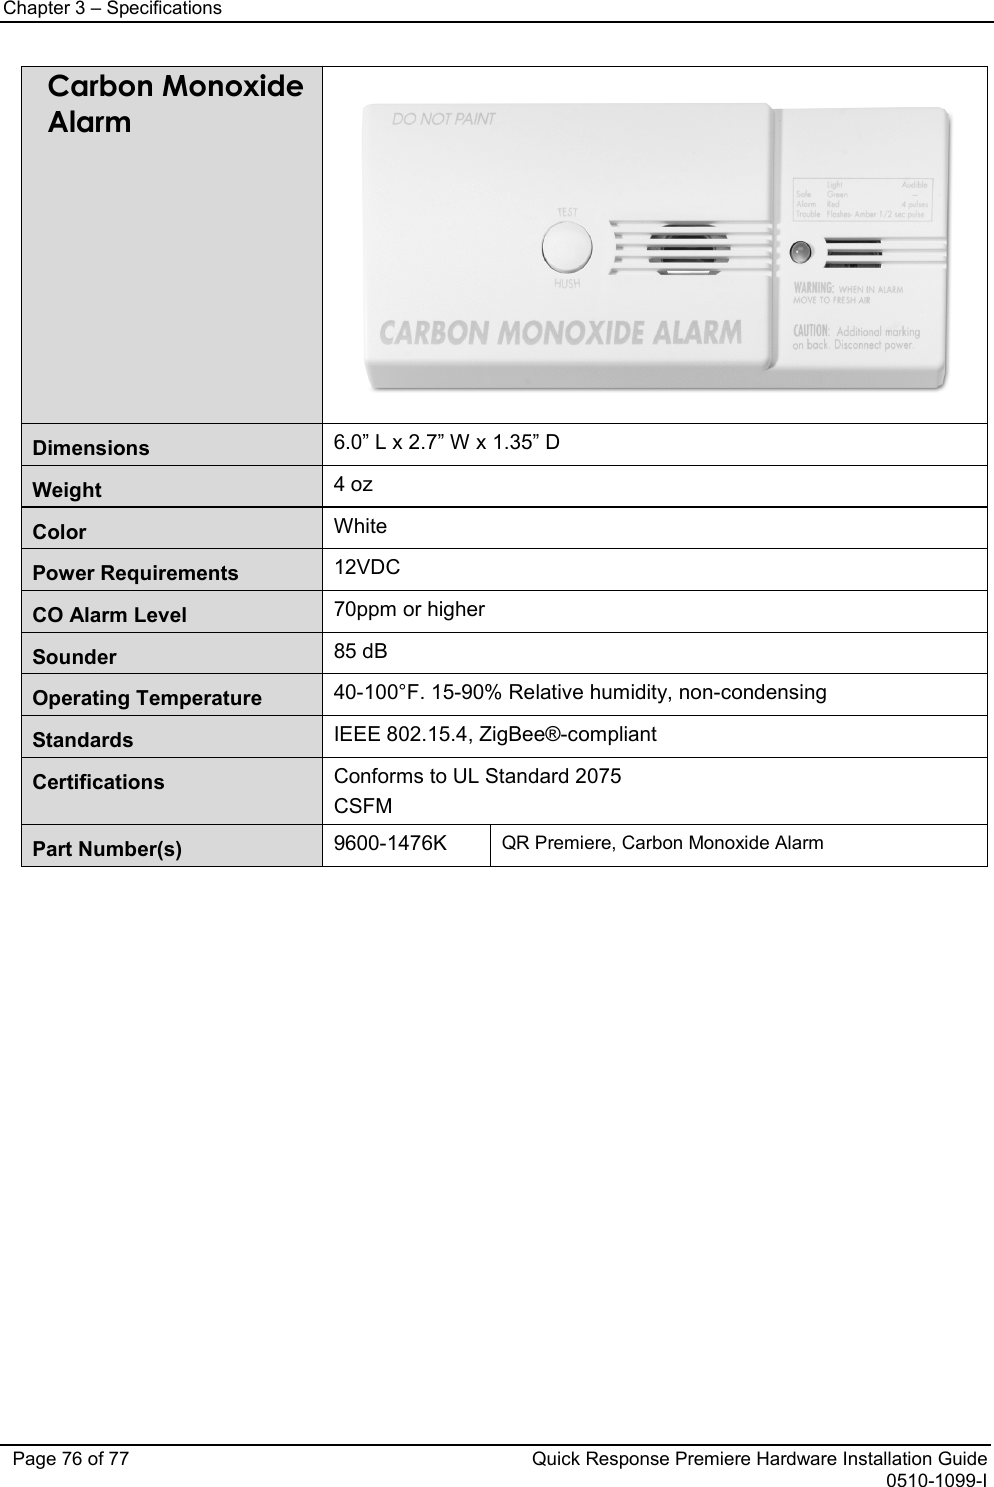 Chapter 3 – Specifications   Page 76 of 77 Quick Response Premiere Hardware Installation Guide 0510-1099-I Carbon Monoxide Alarm  Dimensions 6.0” L x 2.7” W x 1.35” D Weight 4 oz Color White Power Requirements 12VDC CO Alarm Level 70ppm or higher Sounder 85 dB Operating Temperature 40-100°F. 15-90% Relative humidity, non-condensing Standards IEEE 802.15.4, ZigBee®-compliant Certifications Conforms to UL Standard 2075 CSFM Part Number(s)  9600-1476K QR Premiere, Carbon Monoxide Alarm                          